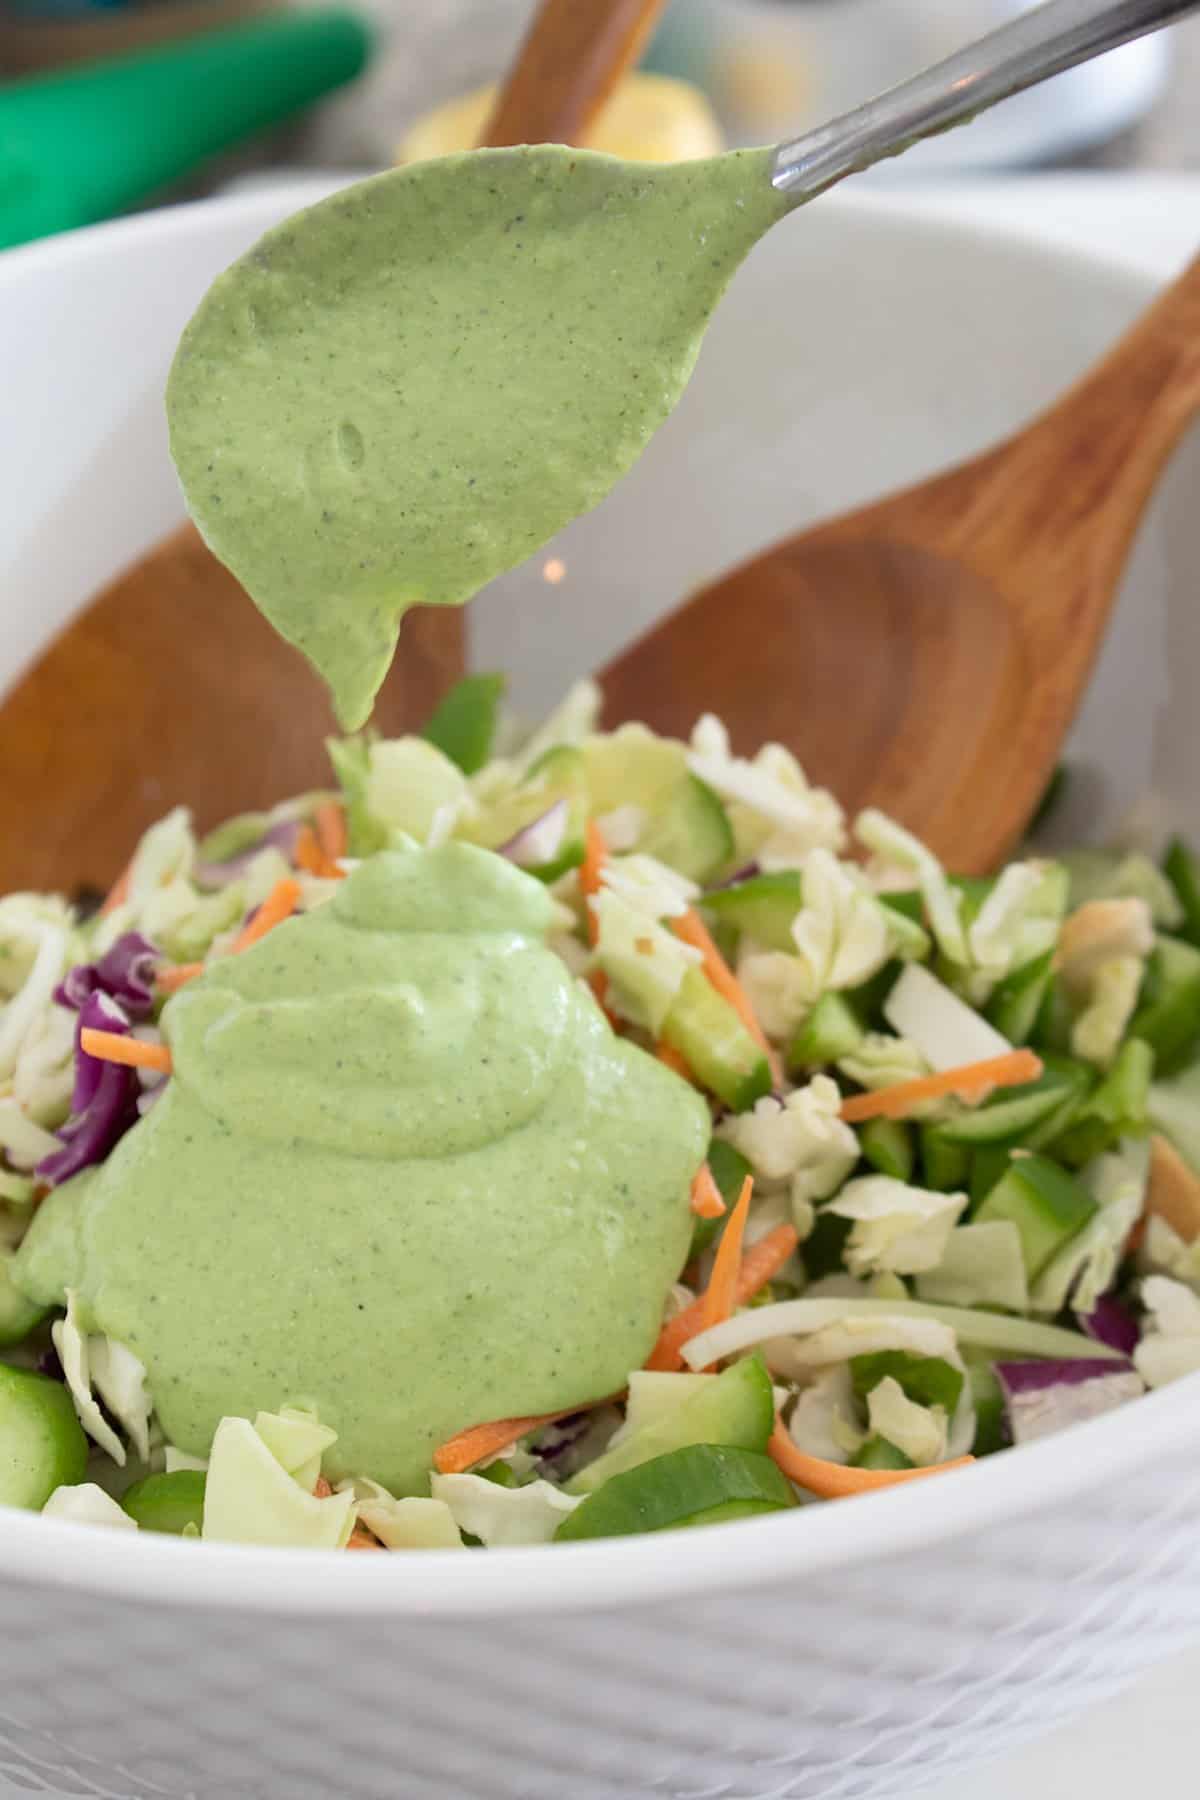 Green goddess dressing being poured on salad